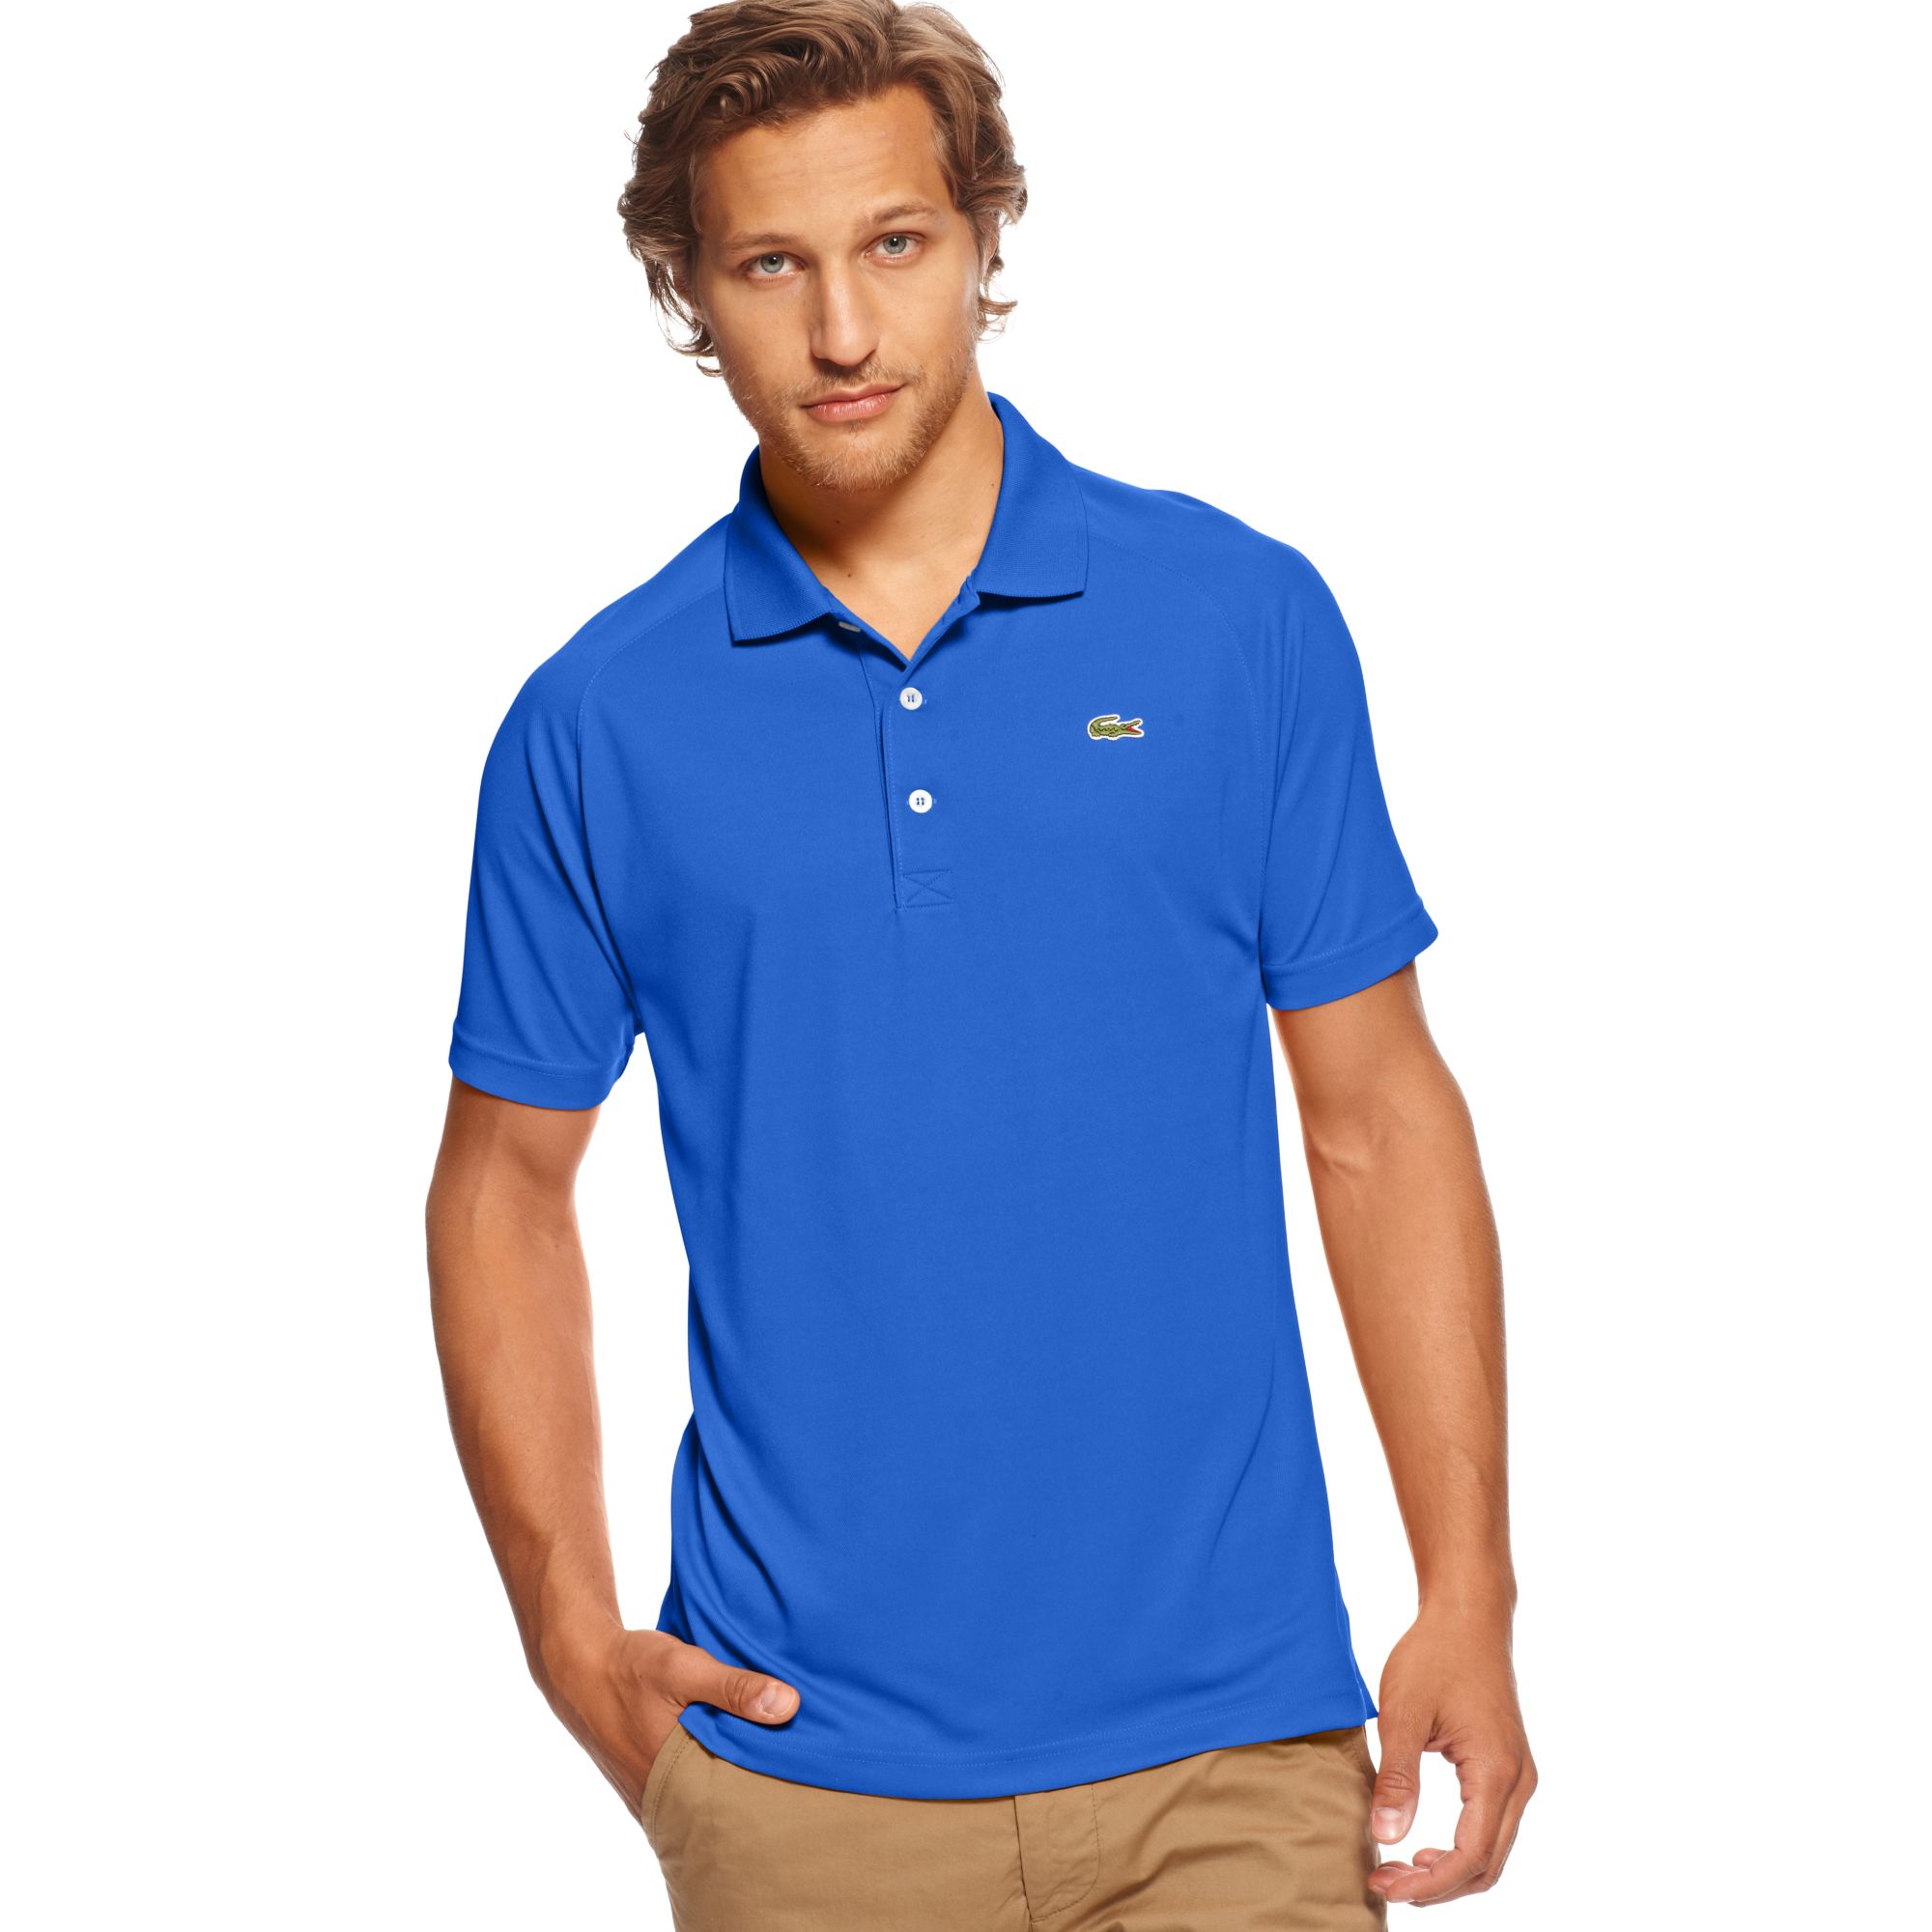 Lacoste Performance Polo Online, SAVE 39% - mpgc.net